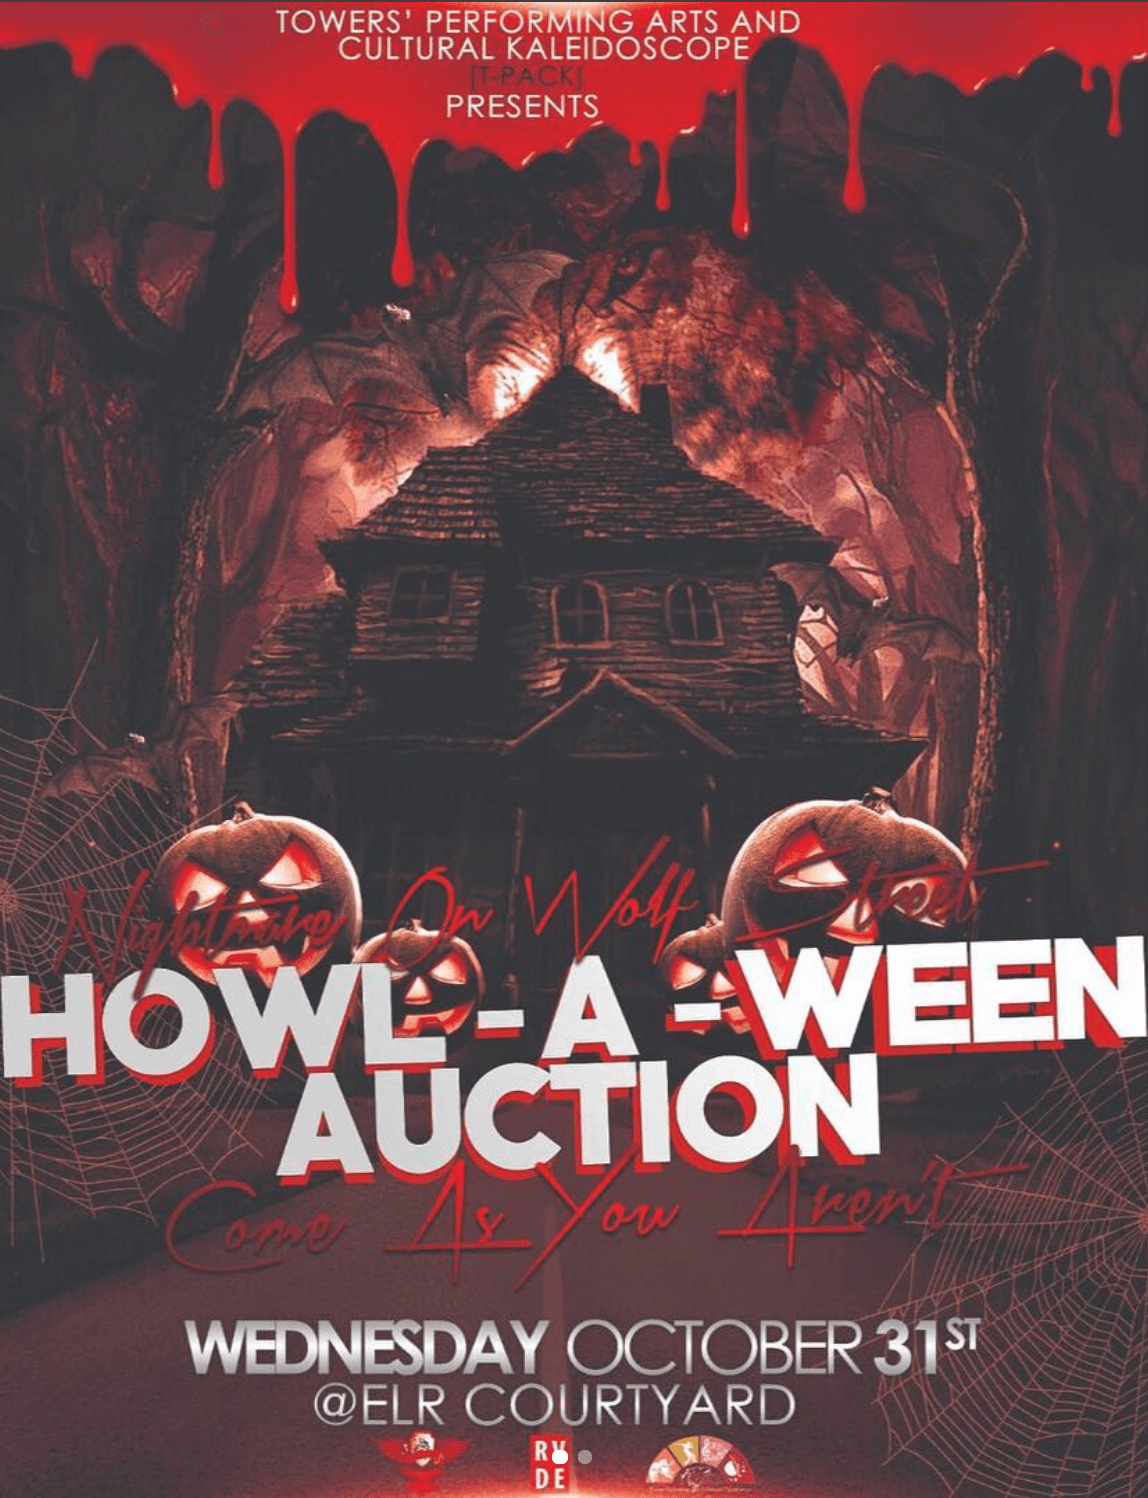 Howl-A-Ween Auction